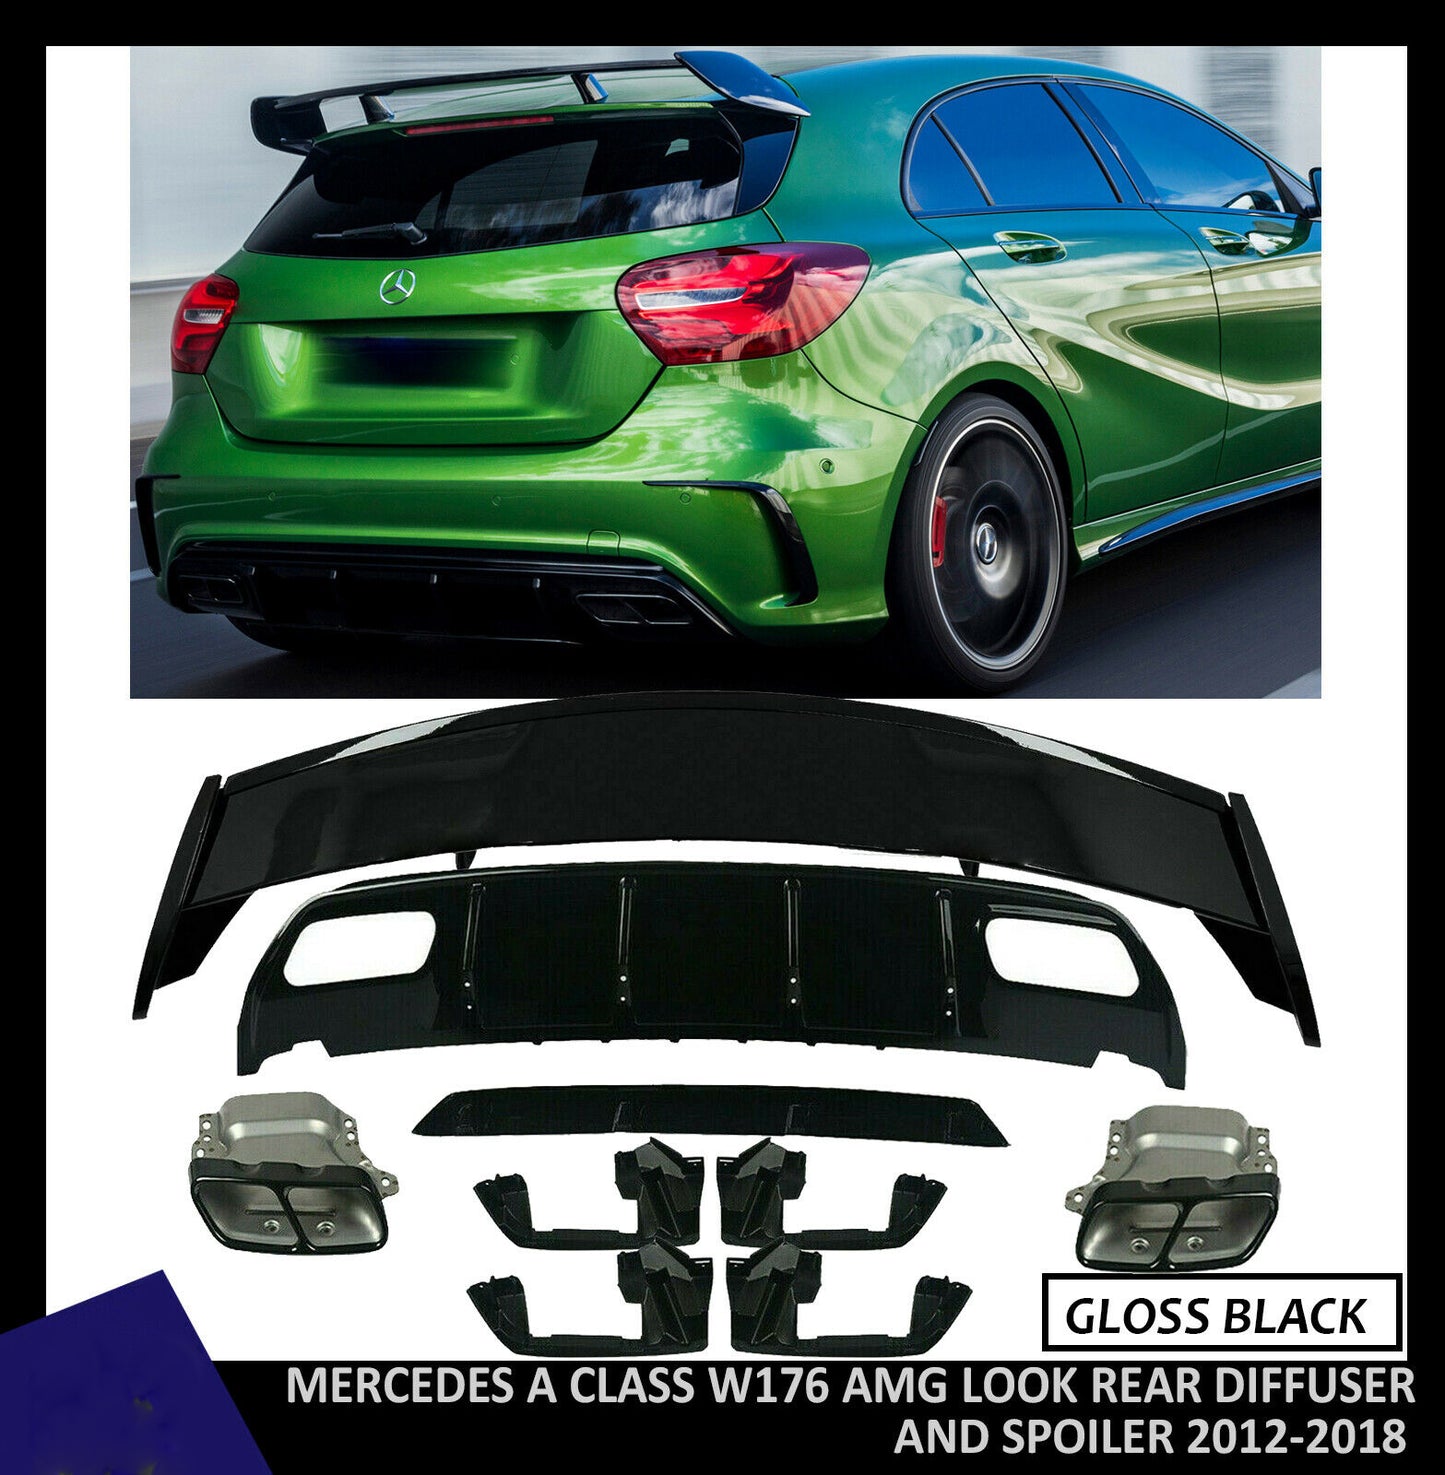 MERCEDES A CLASS W176 AMG A45 LOOK REAR DIFFUSER TAILPIPES AND ROOF SPOILER WING